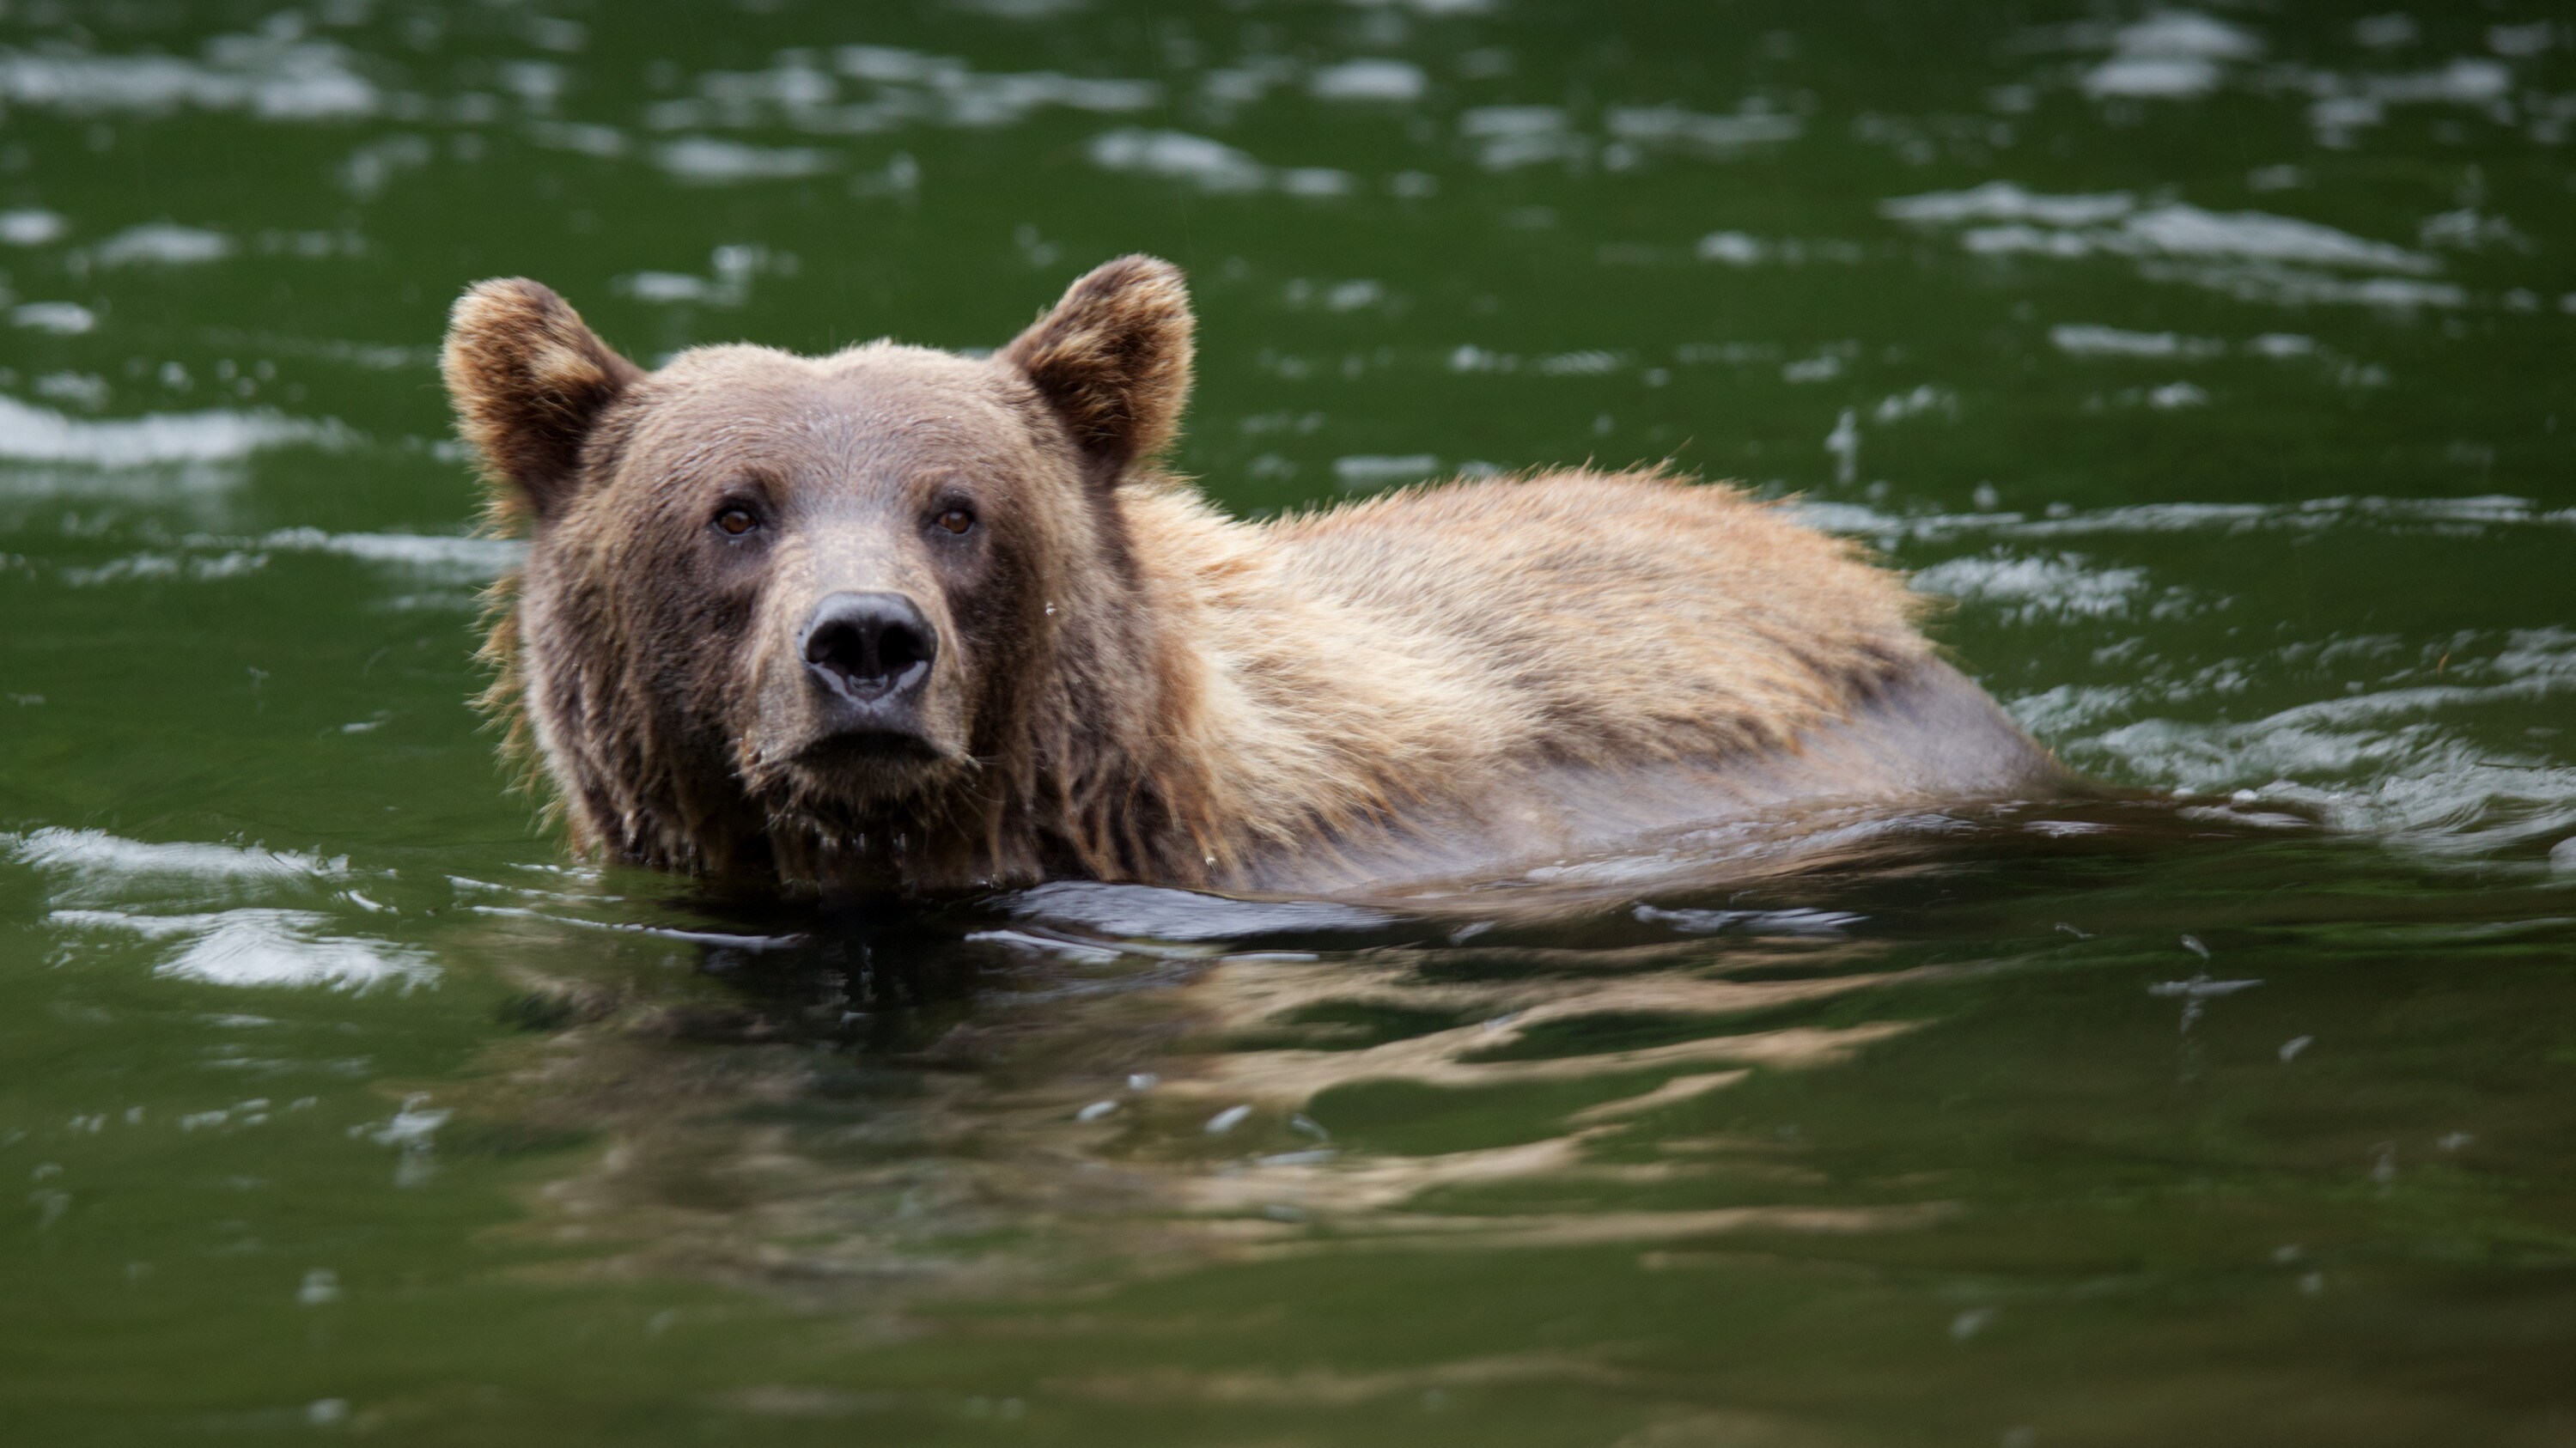 Fern the grizzly bear swims in water looking for salmon. (National Geographic for Disney+/Samuel Ellis)